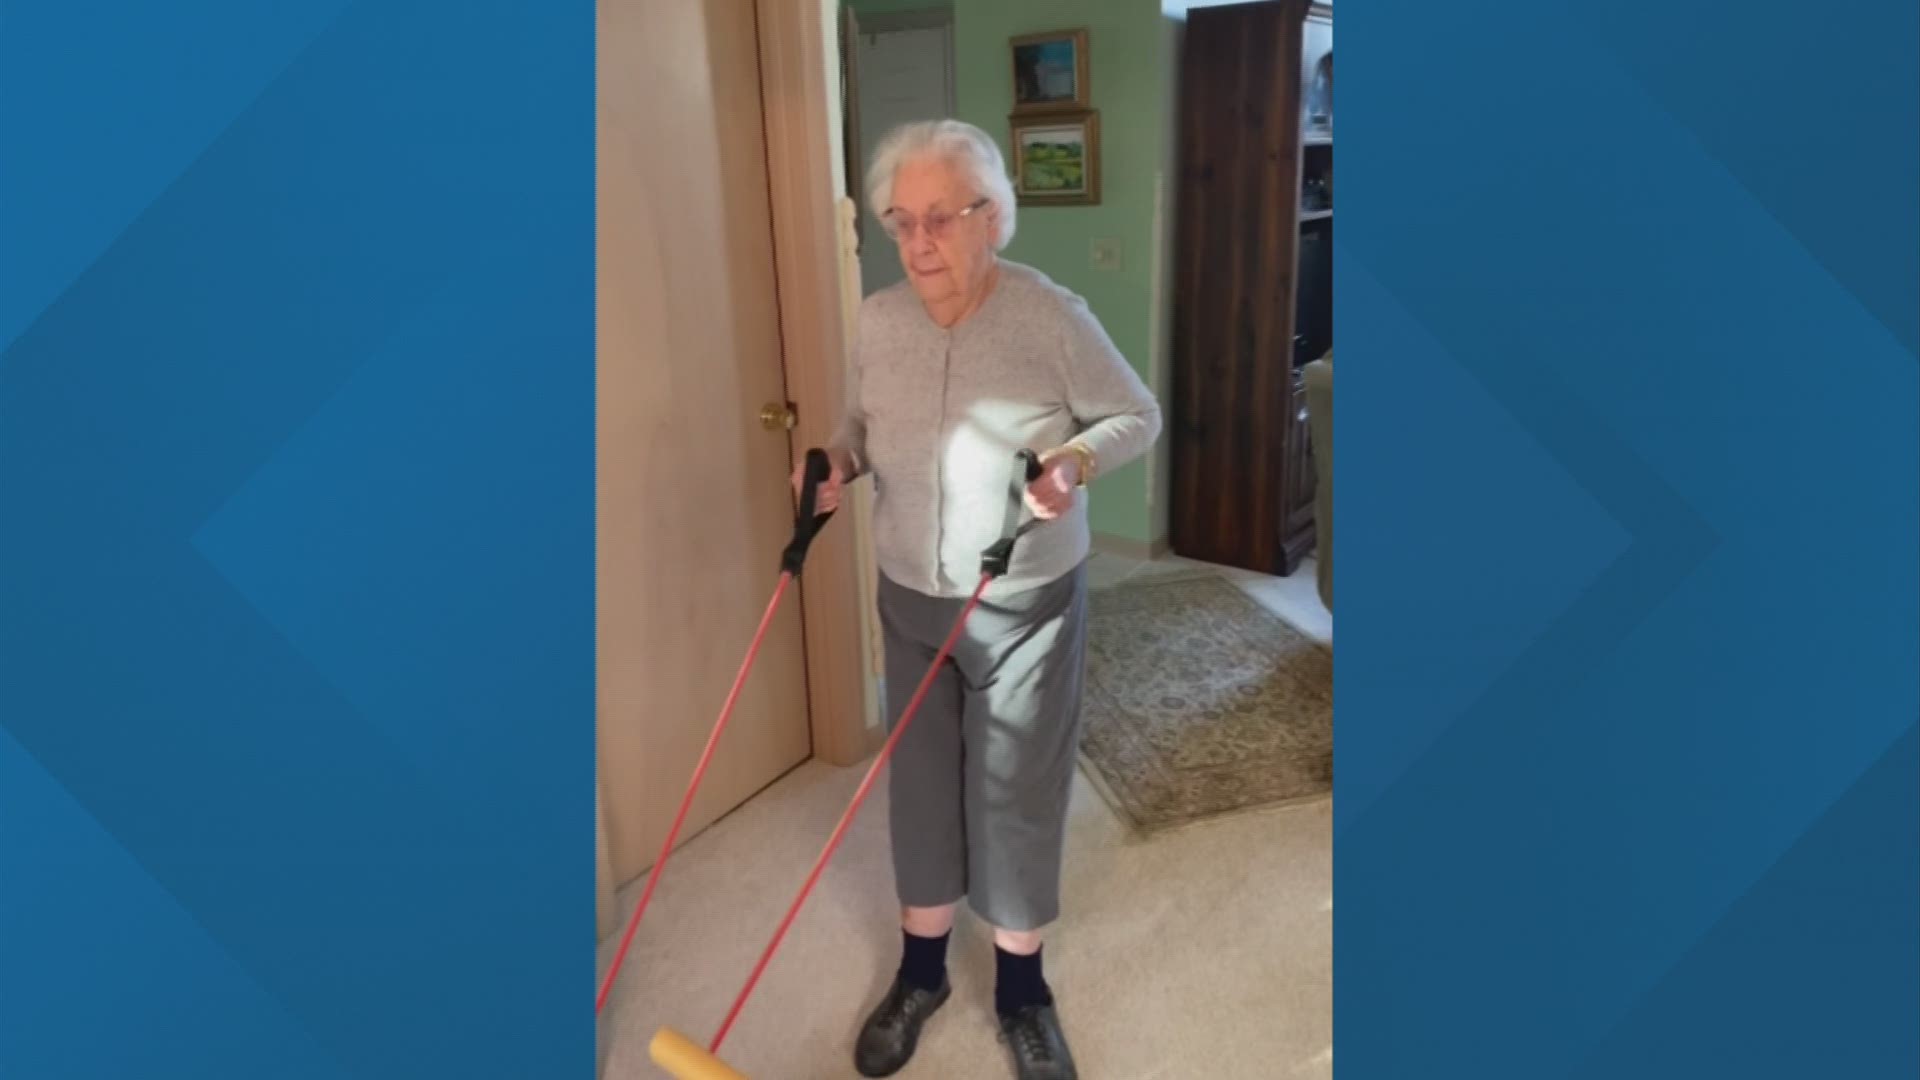 A local woman keeps fit at 100 years old.